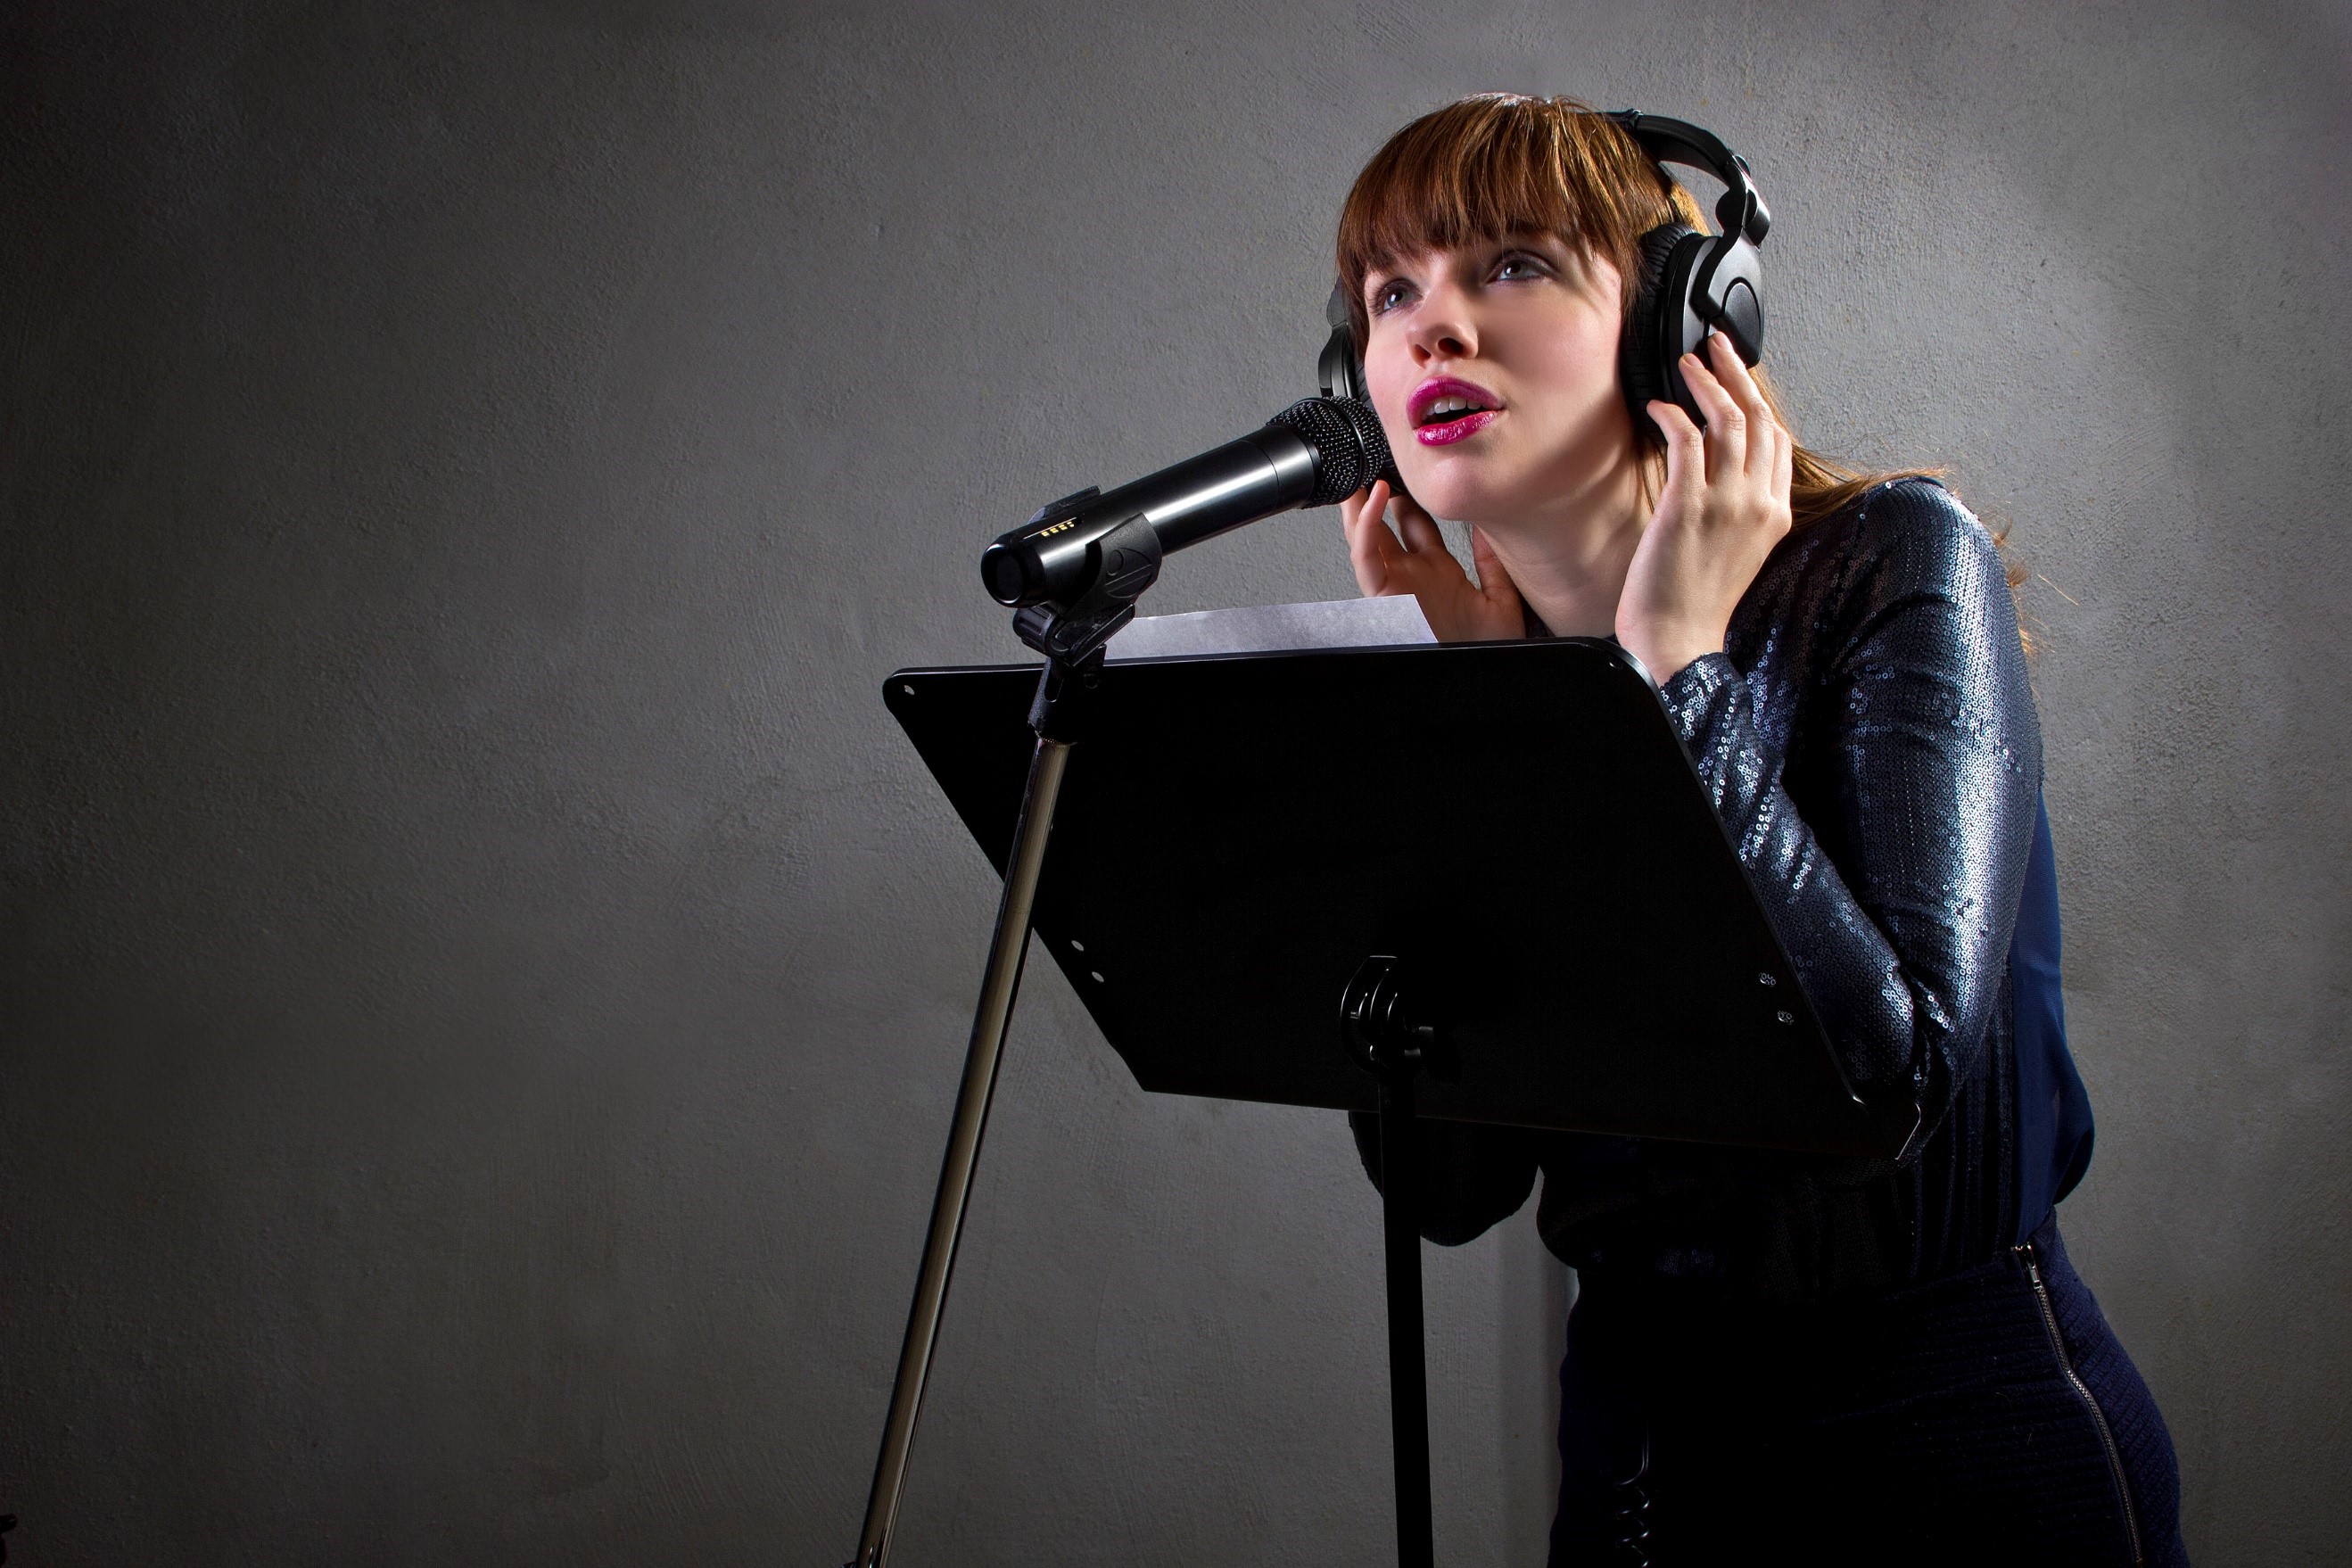 professional female voiceover artist with headphones and microphone